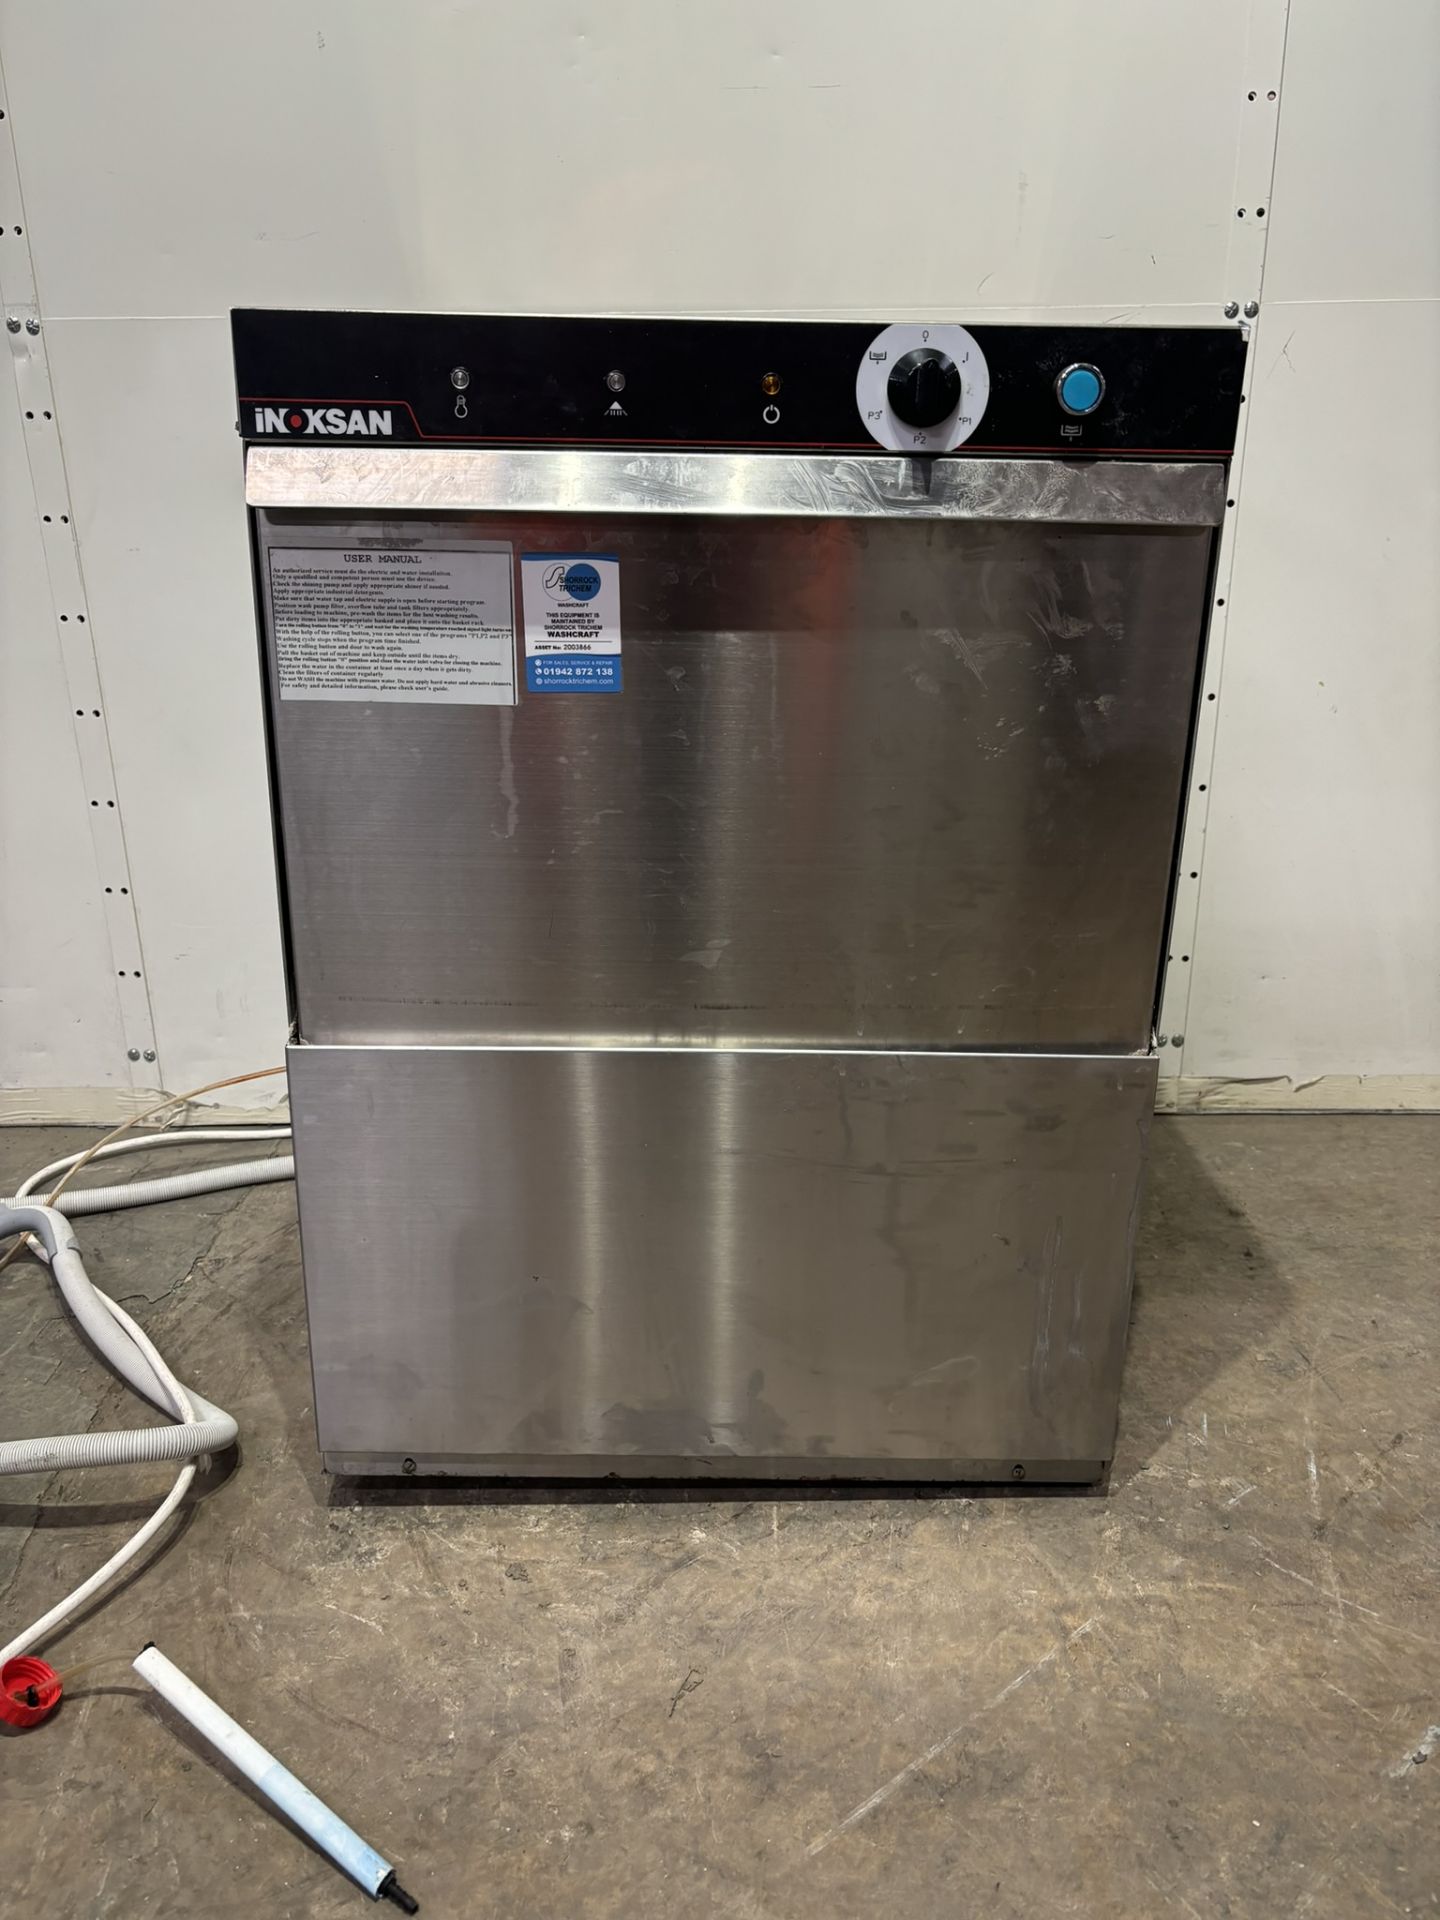 Inoksan BYM-052 Commercial Front Loading Dishwasher - Image 2 of 9